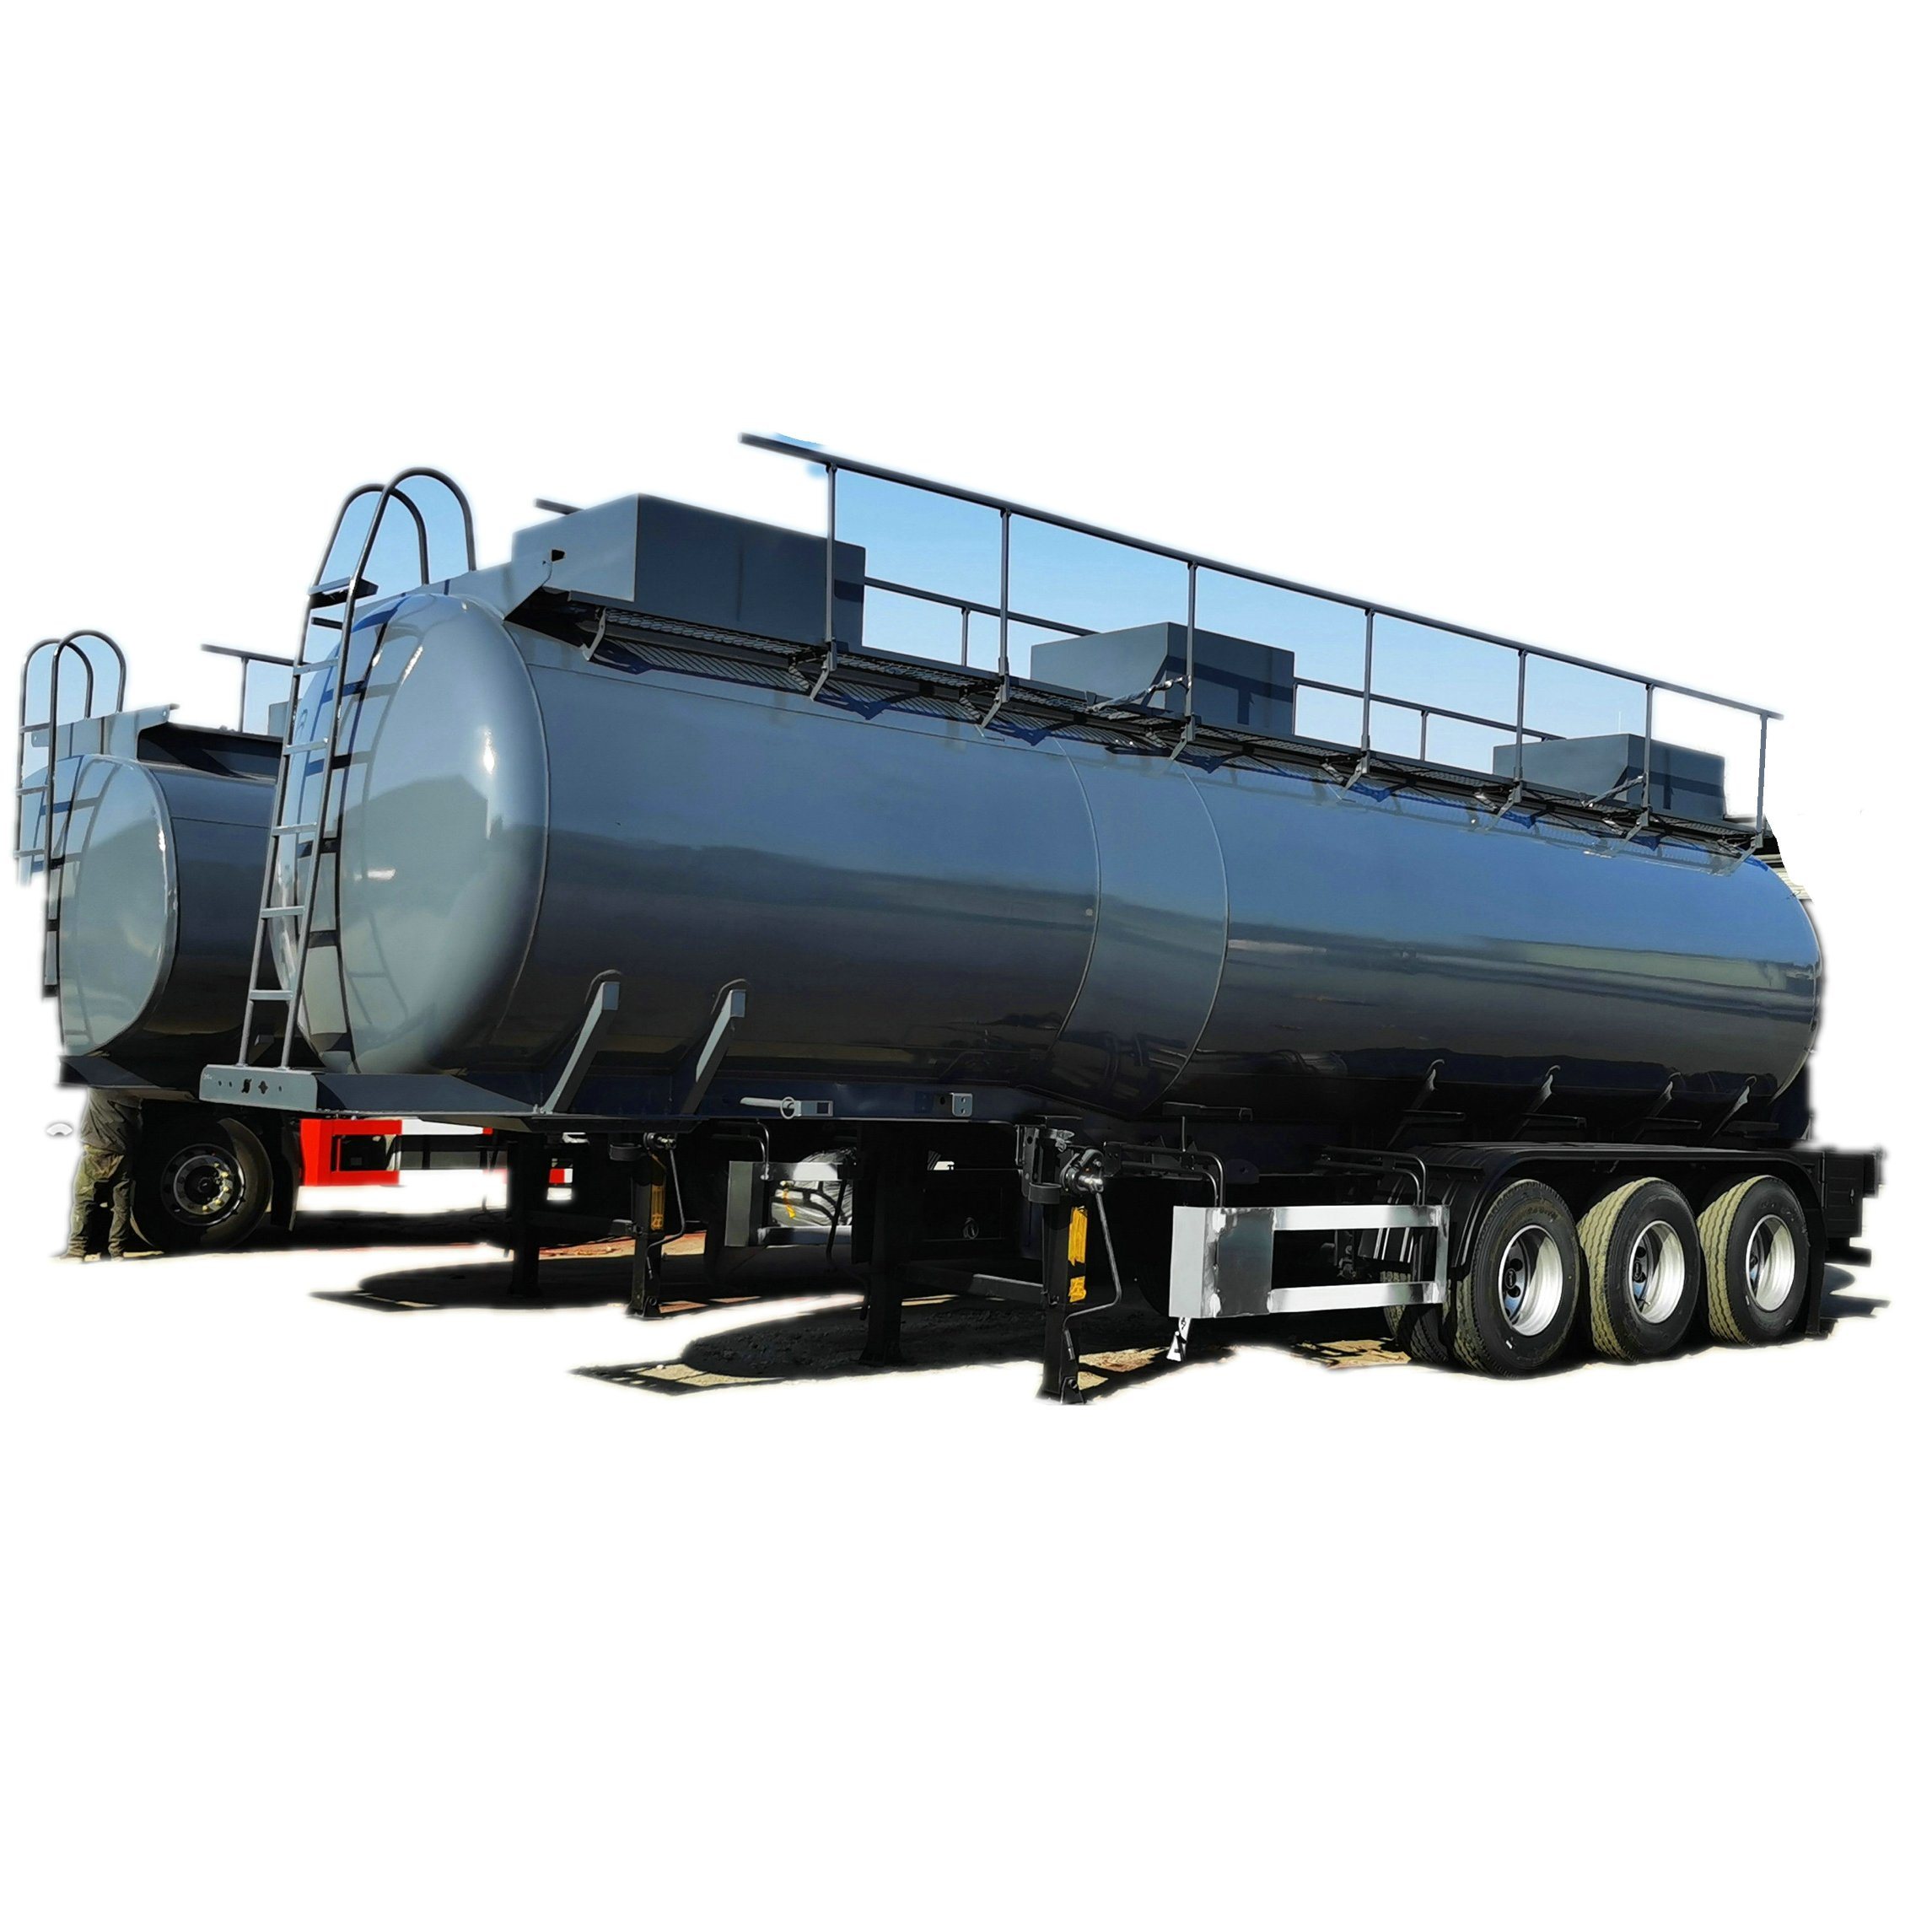  25 m3-60 M3 Stainless Tank for Trailer Transport Food Oil, Ethanol, Liquor, Win, Alcohol, Water Reducers